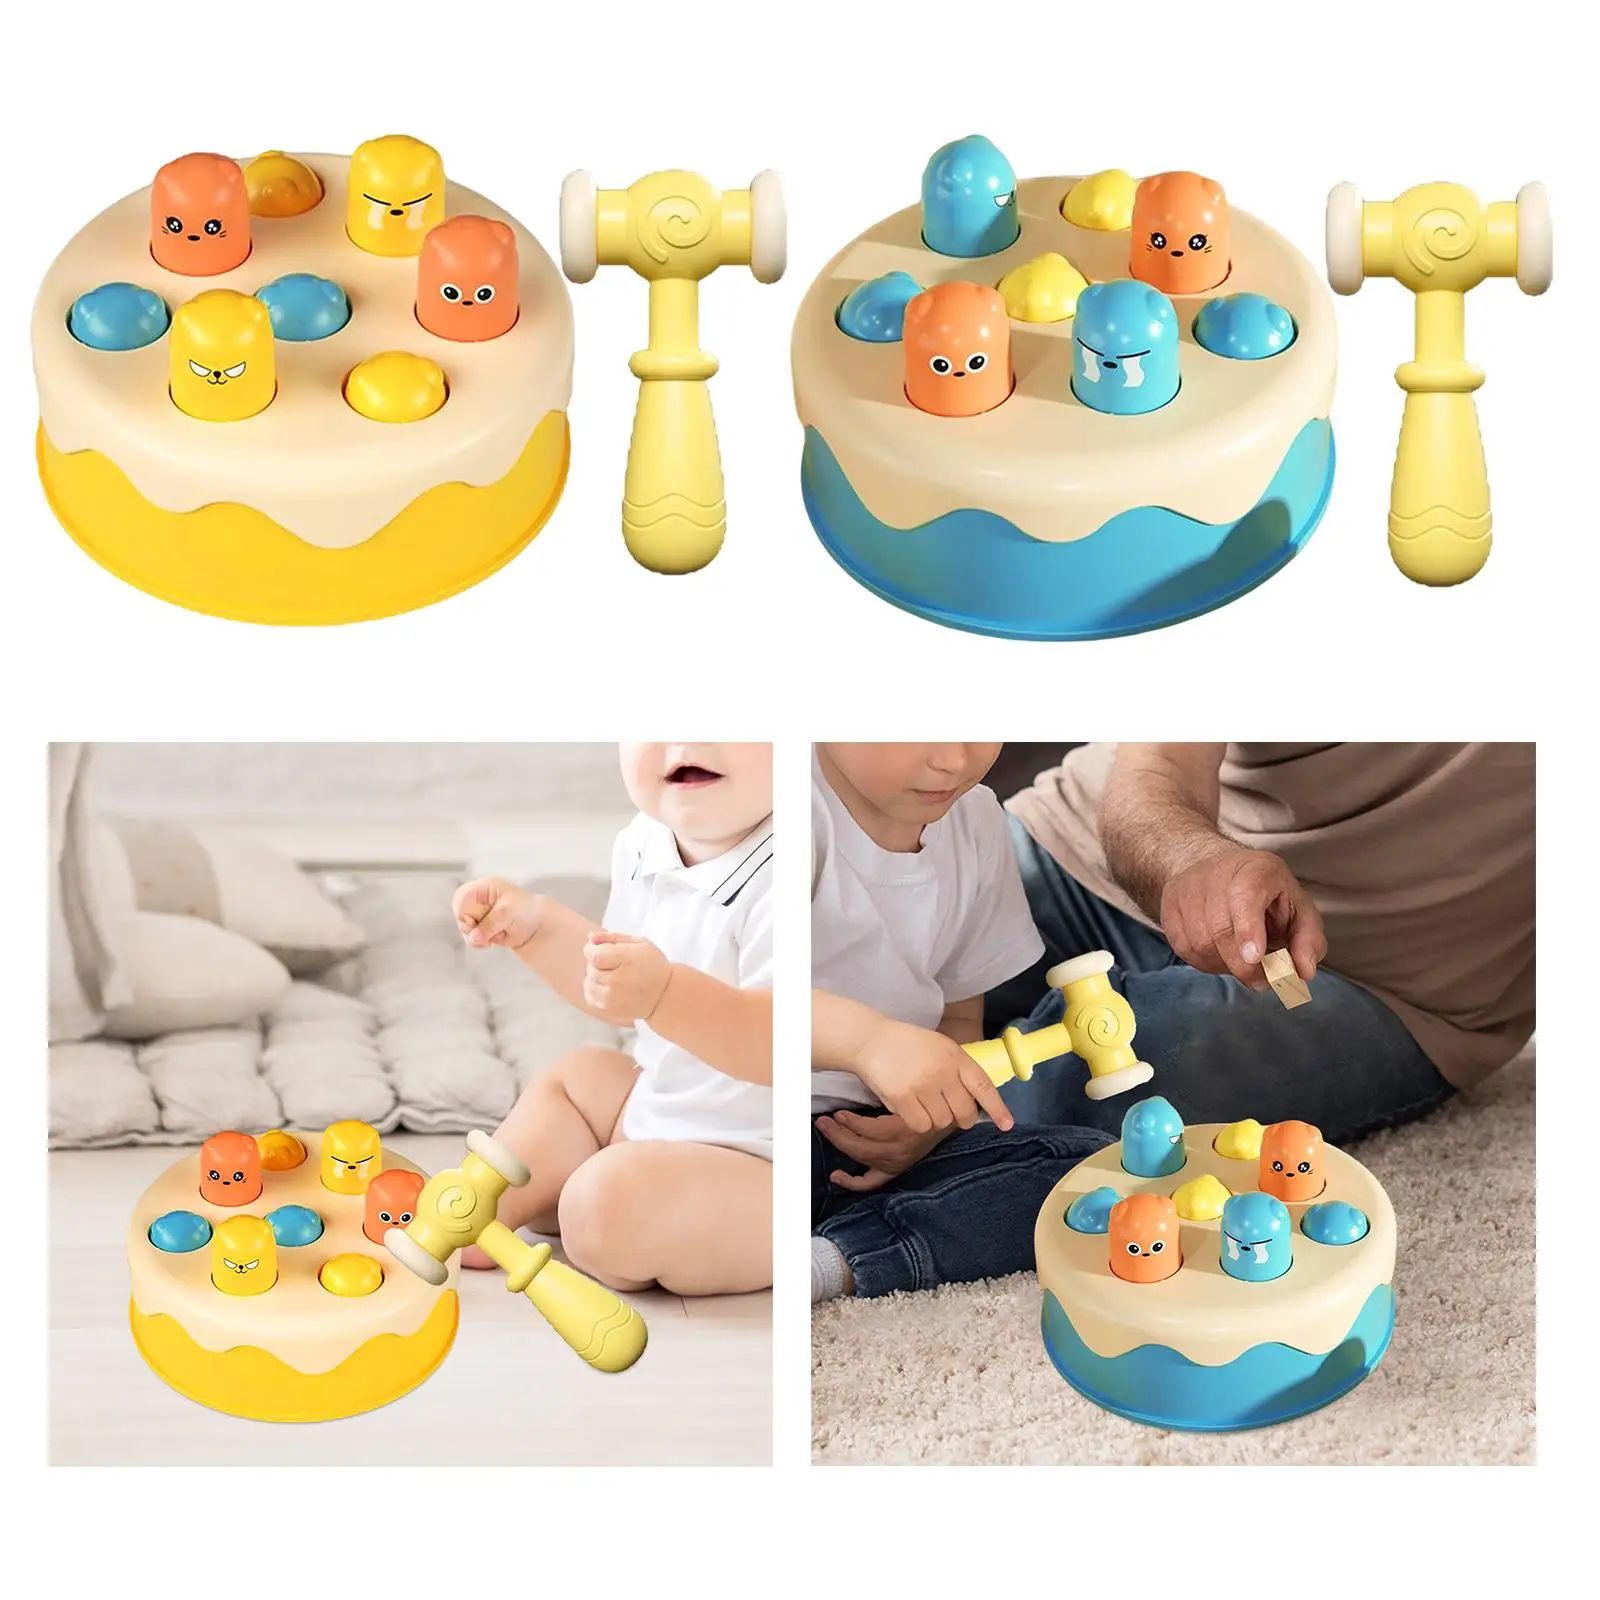 Whack A Hamster Game Hammering Pounding Toys Smooth Edges and Surfaces Fine Workmanship